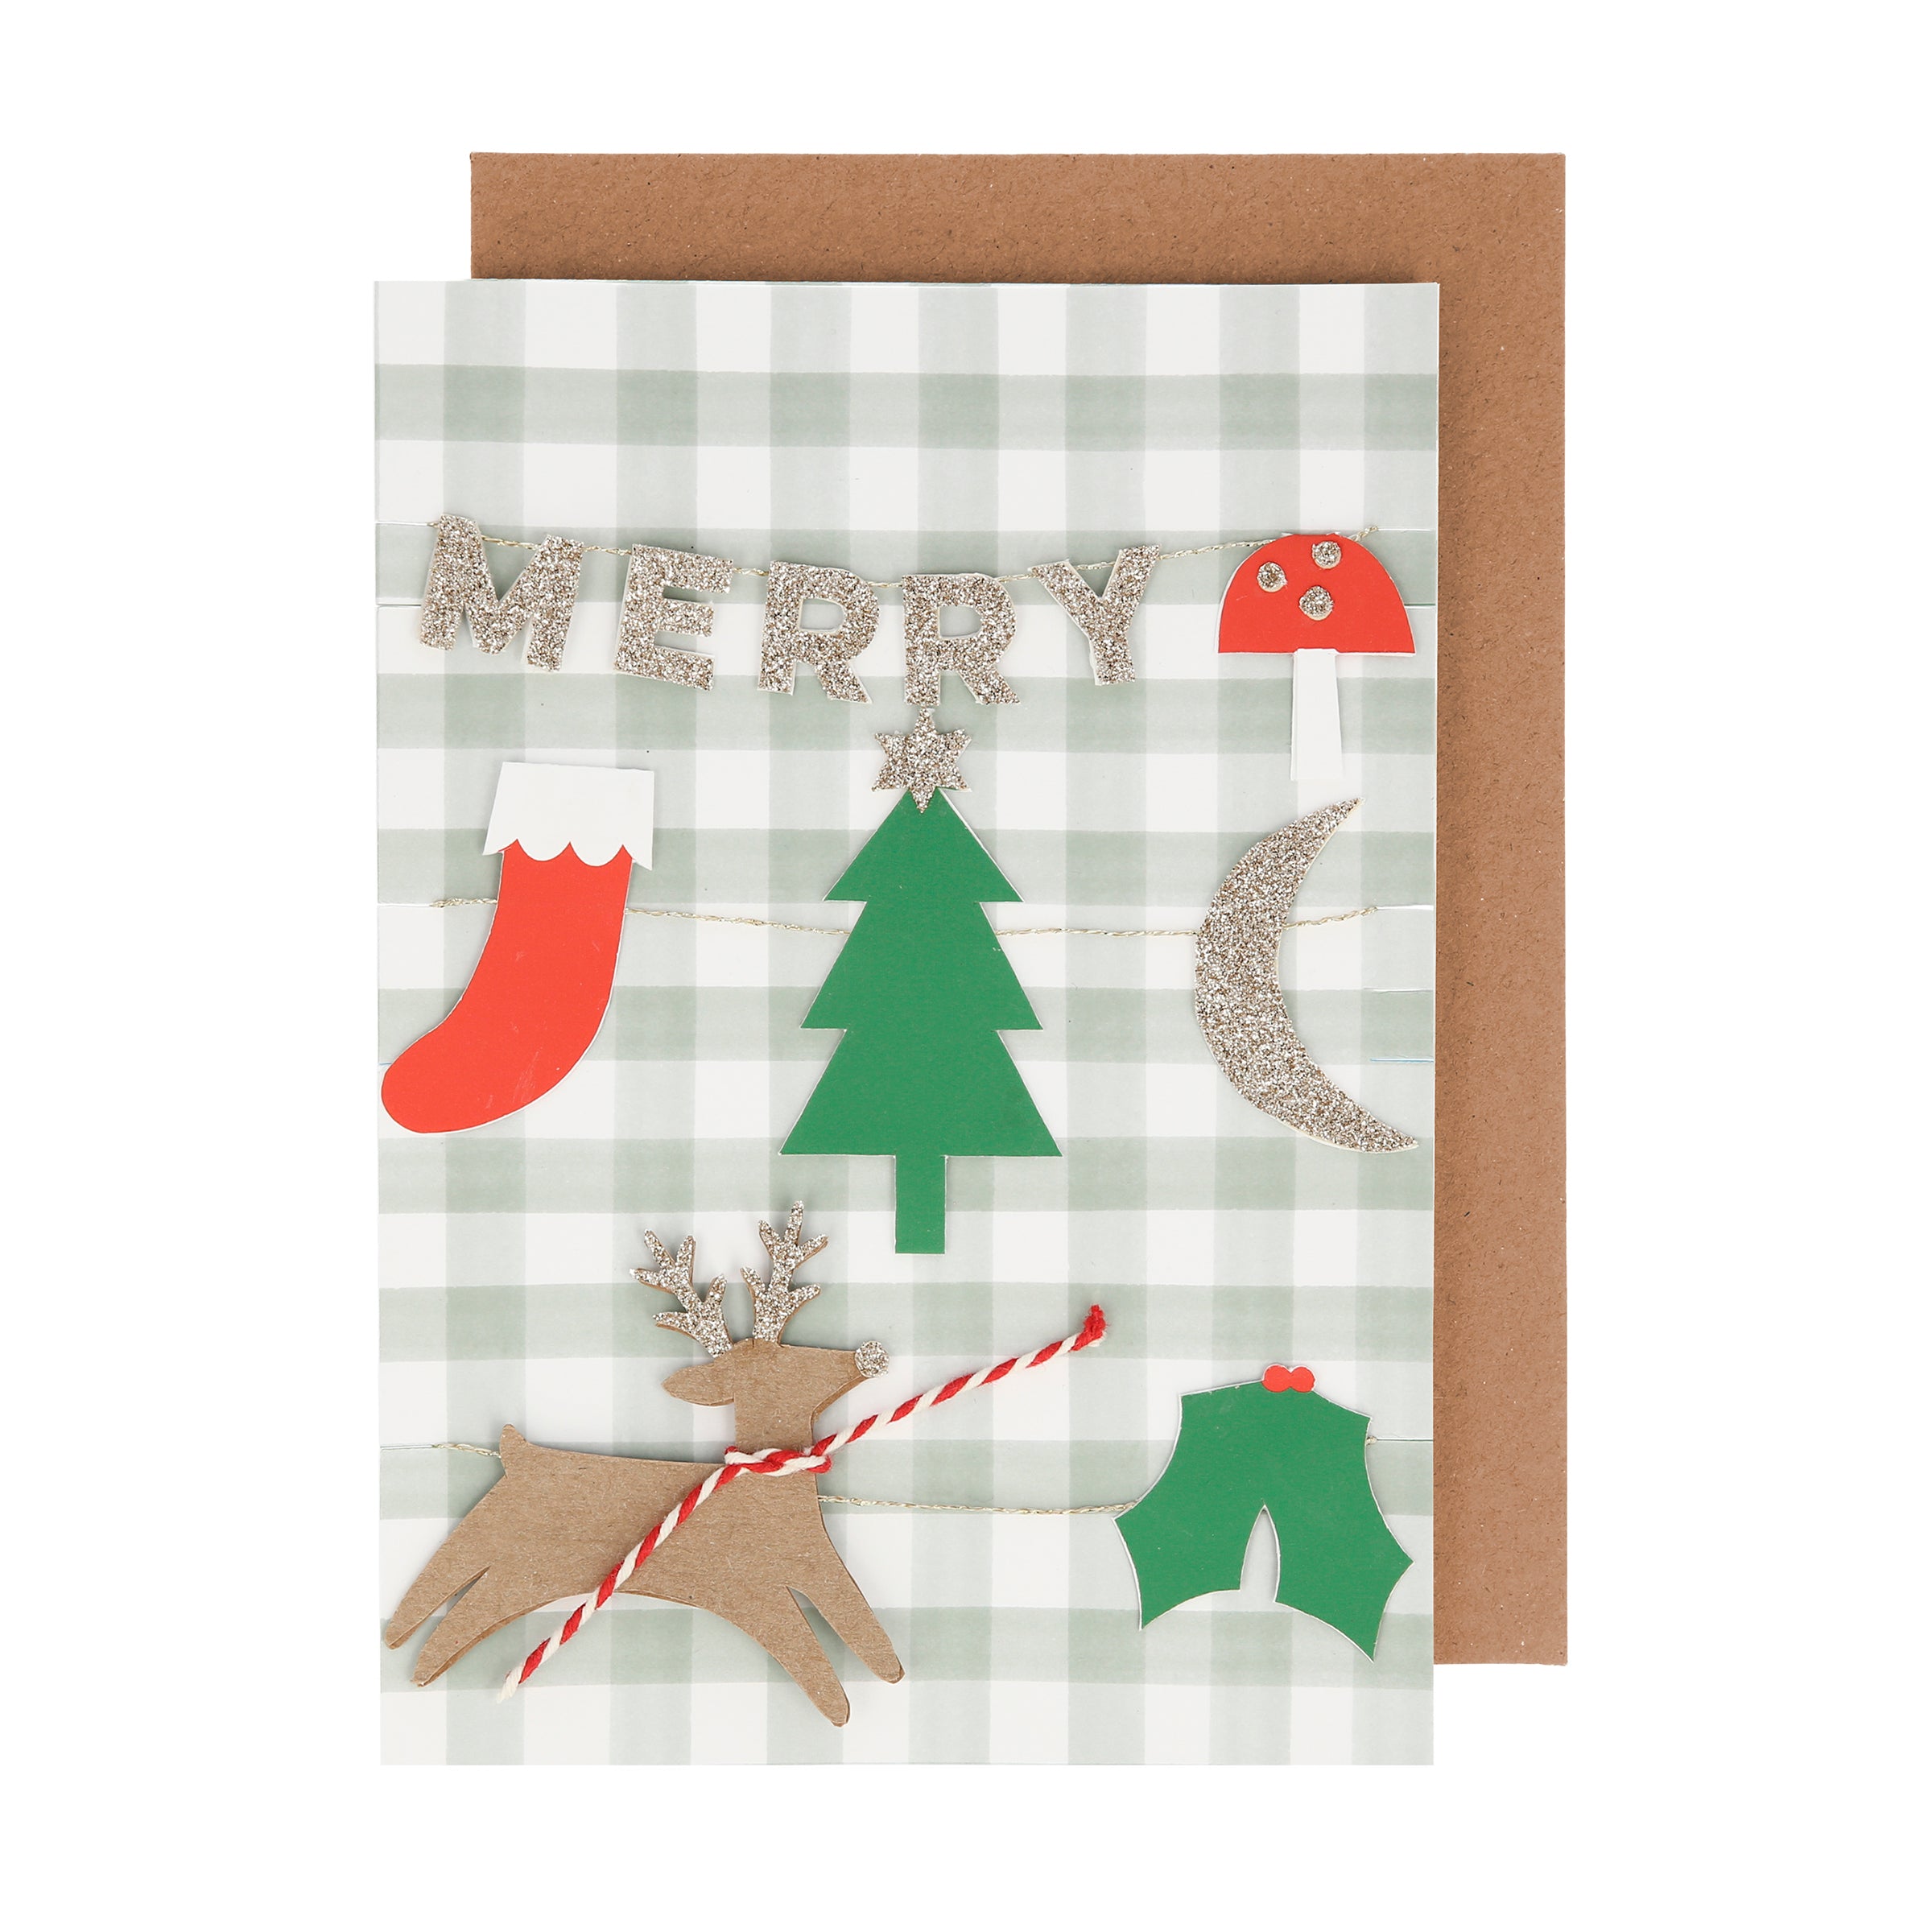 Our 3D Christmas card features 2 Christmas garlands for decorative effect.